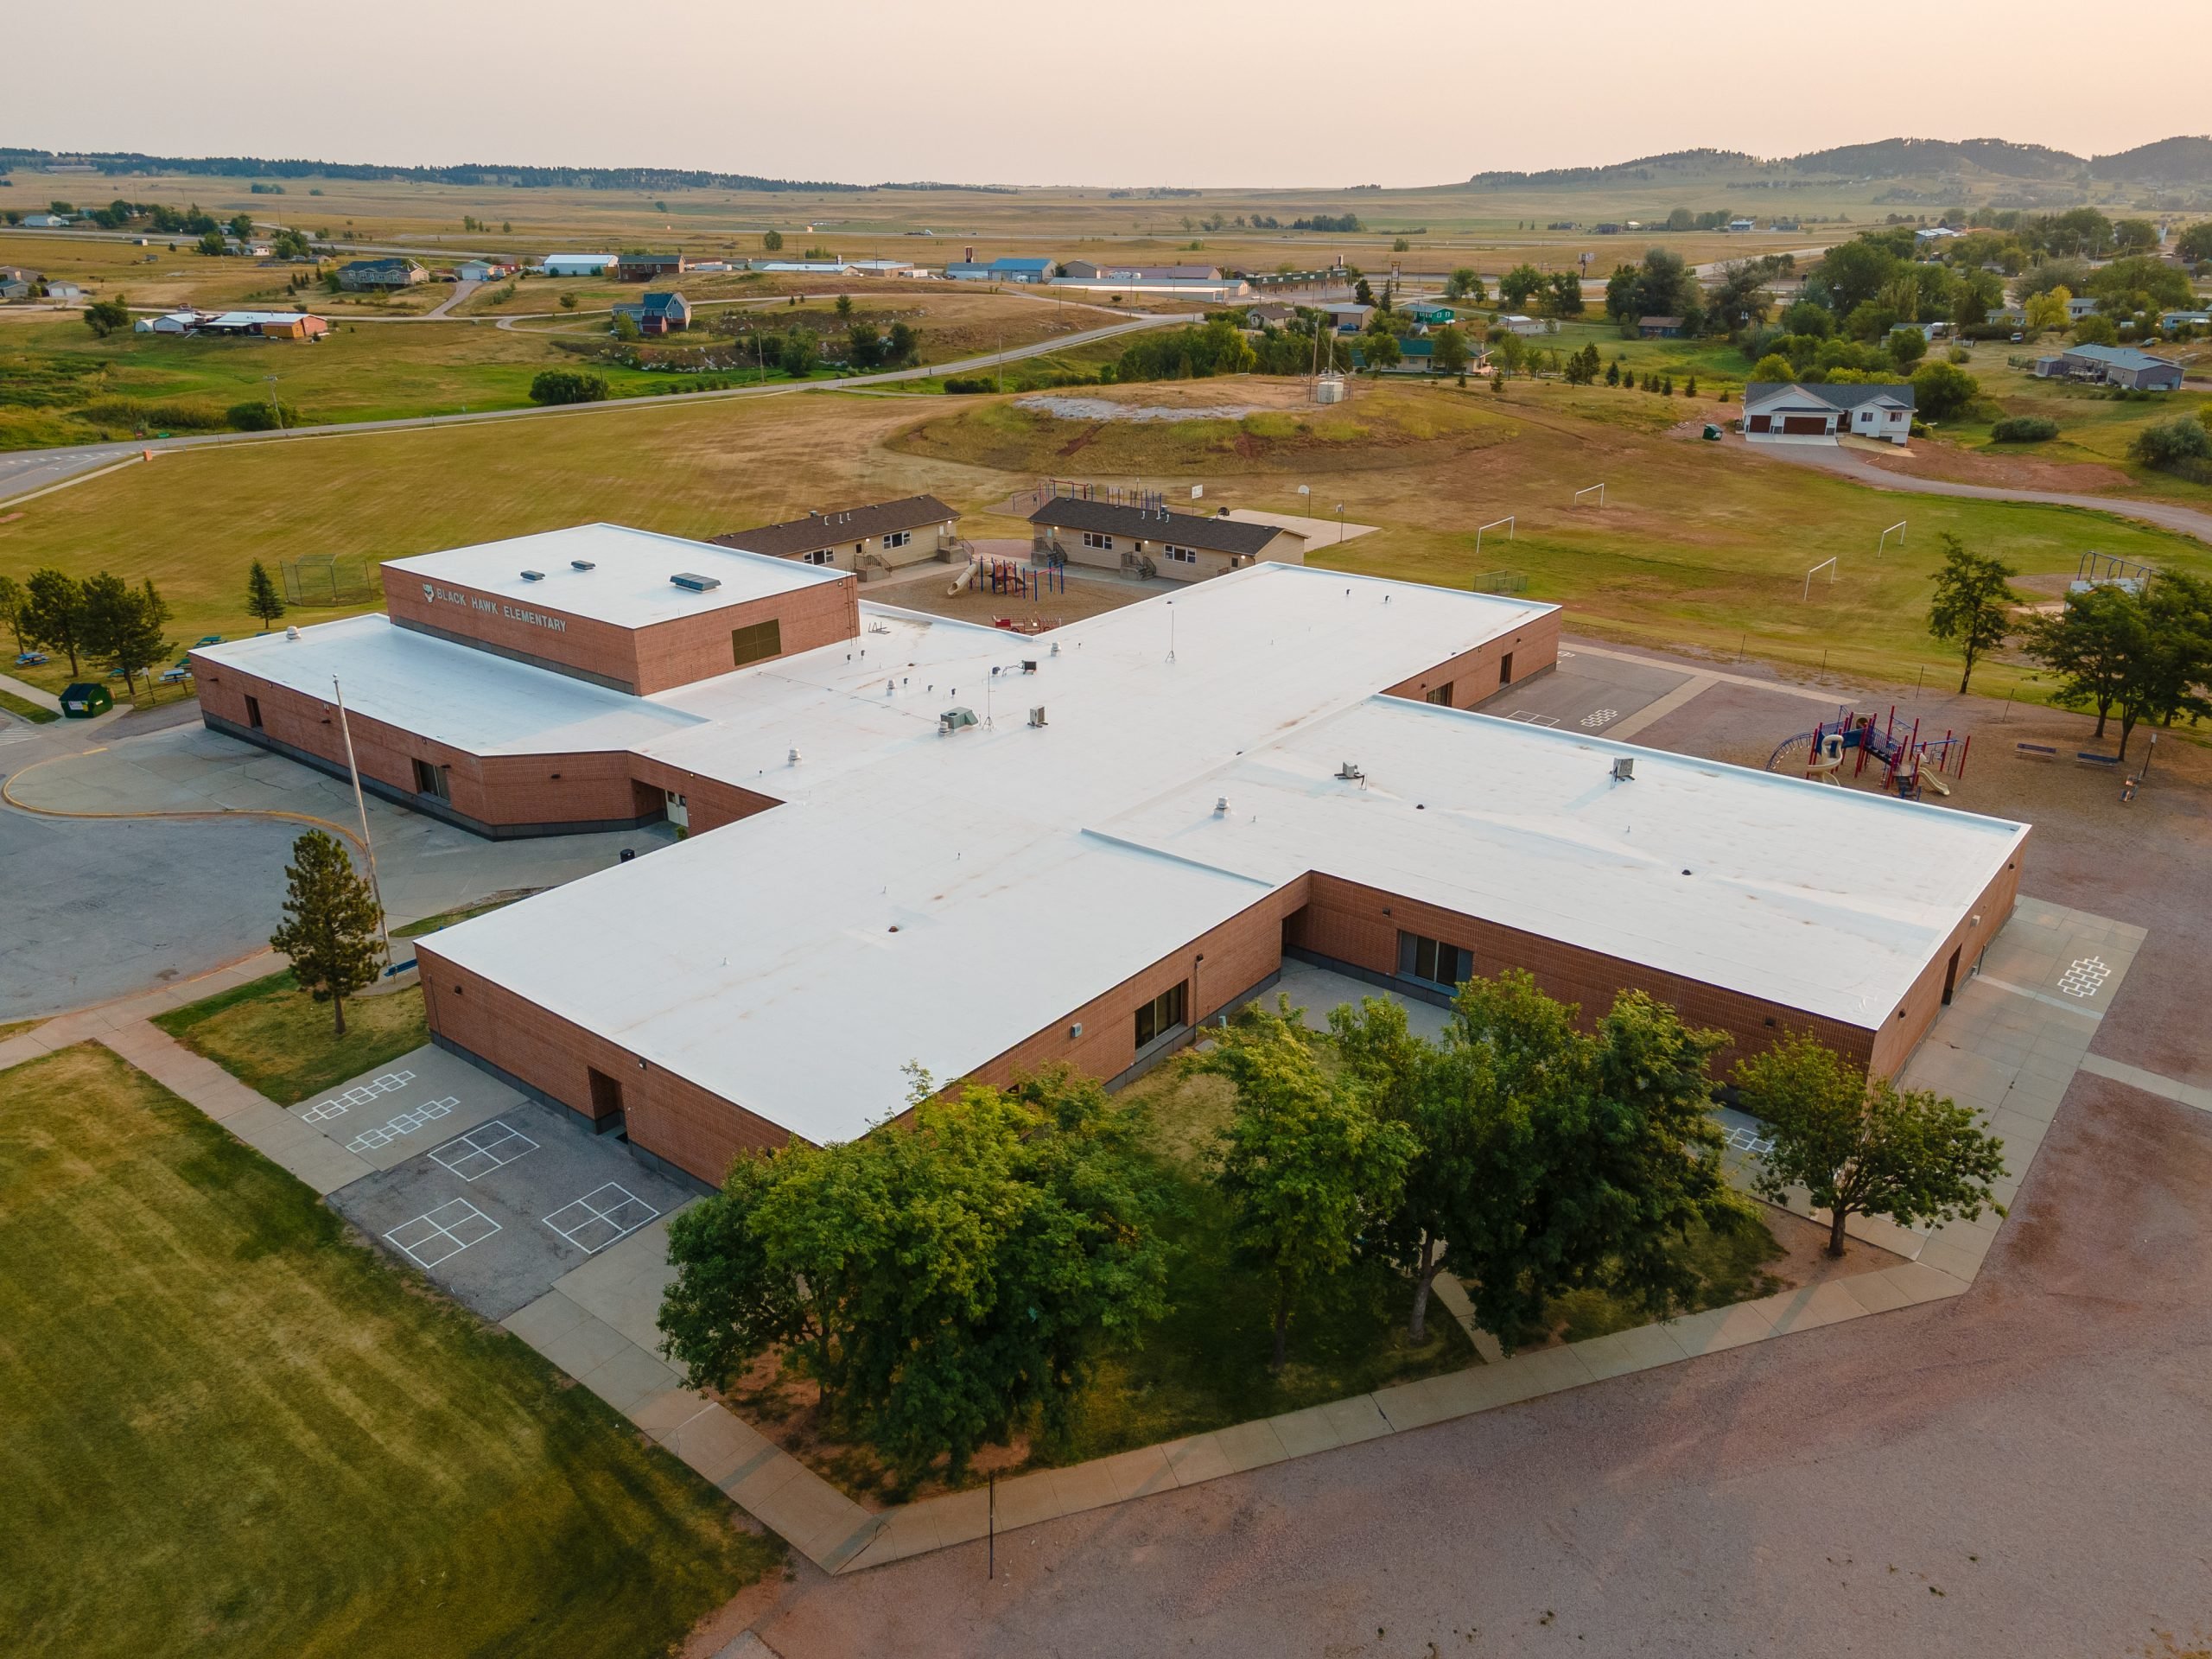 Roofing in Rapid City, SD